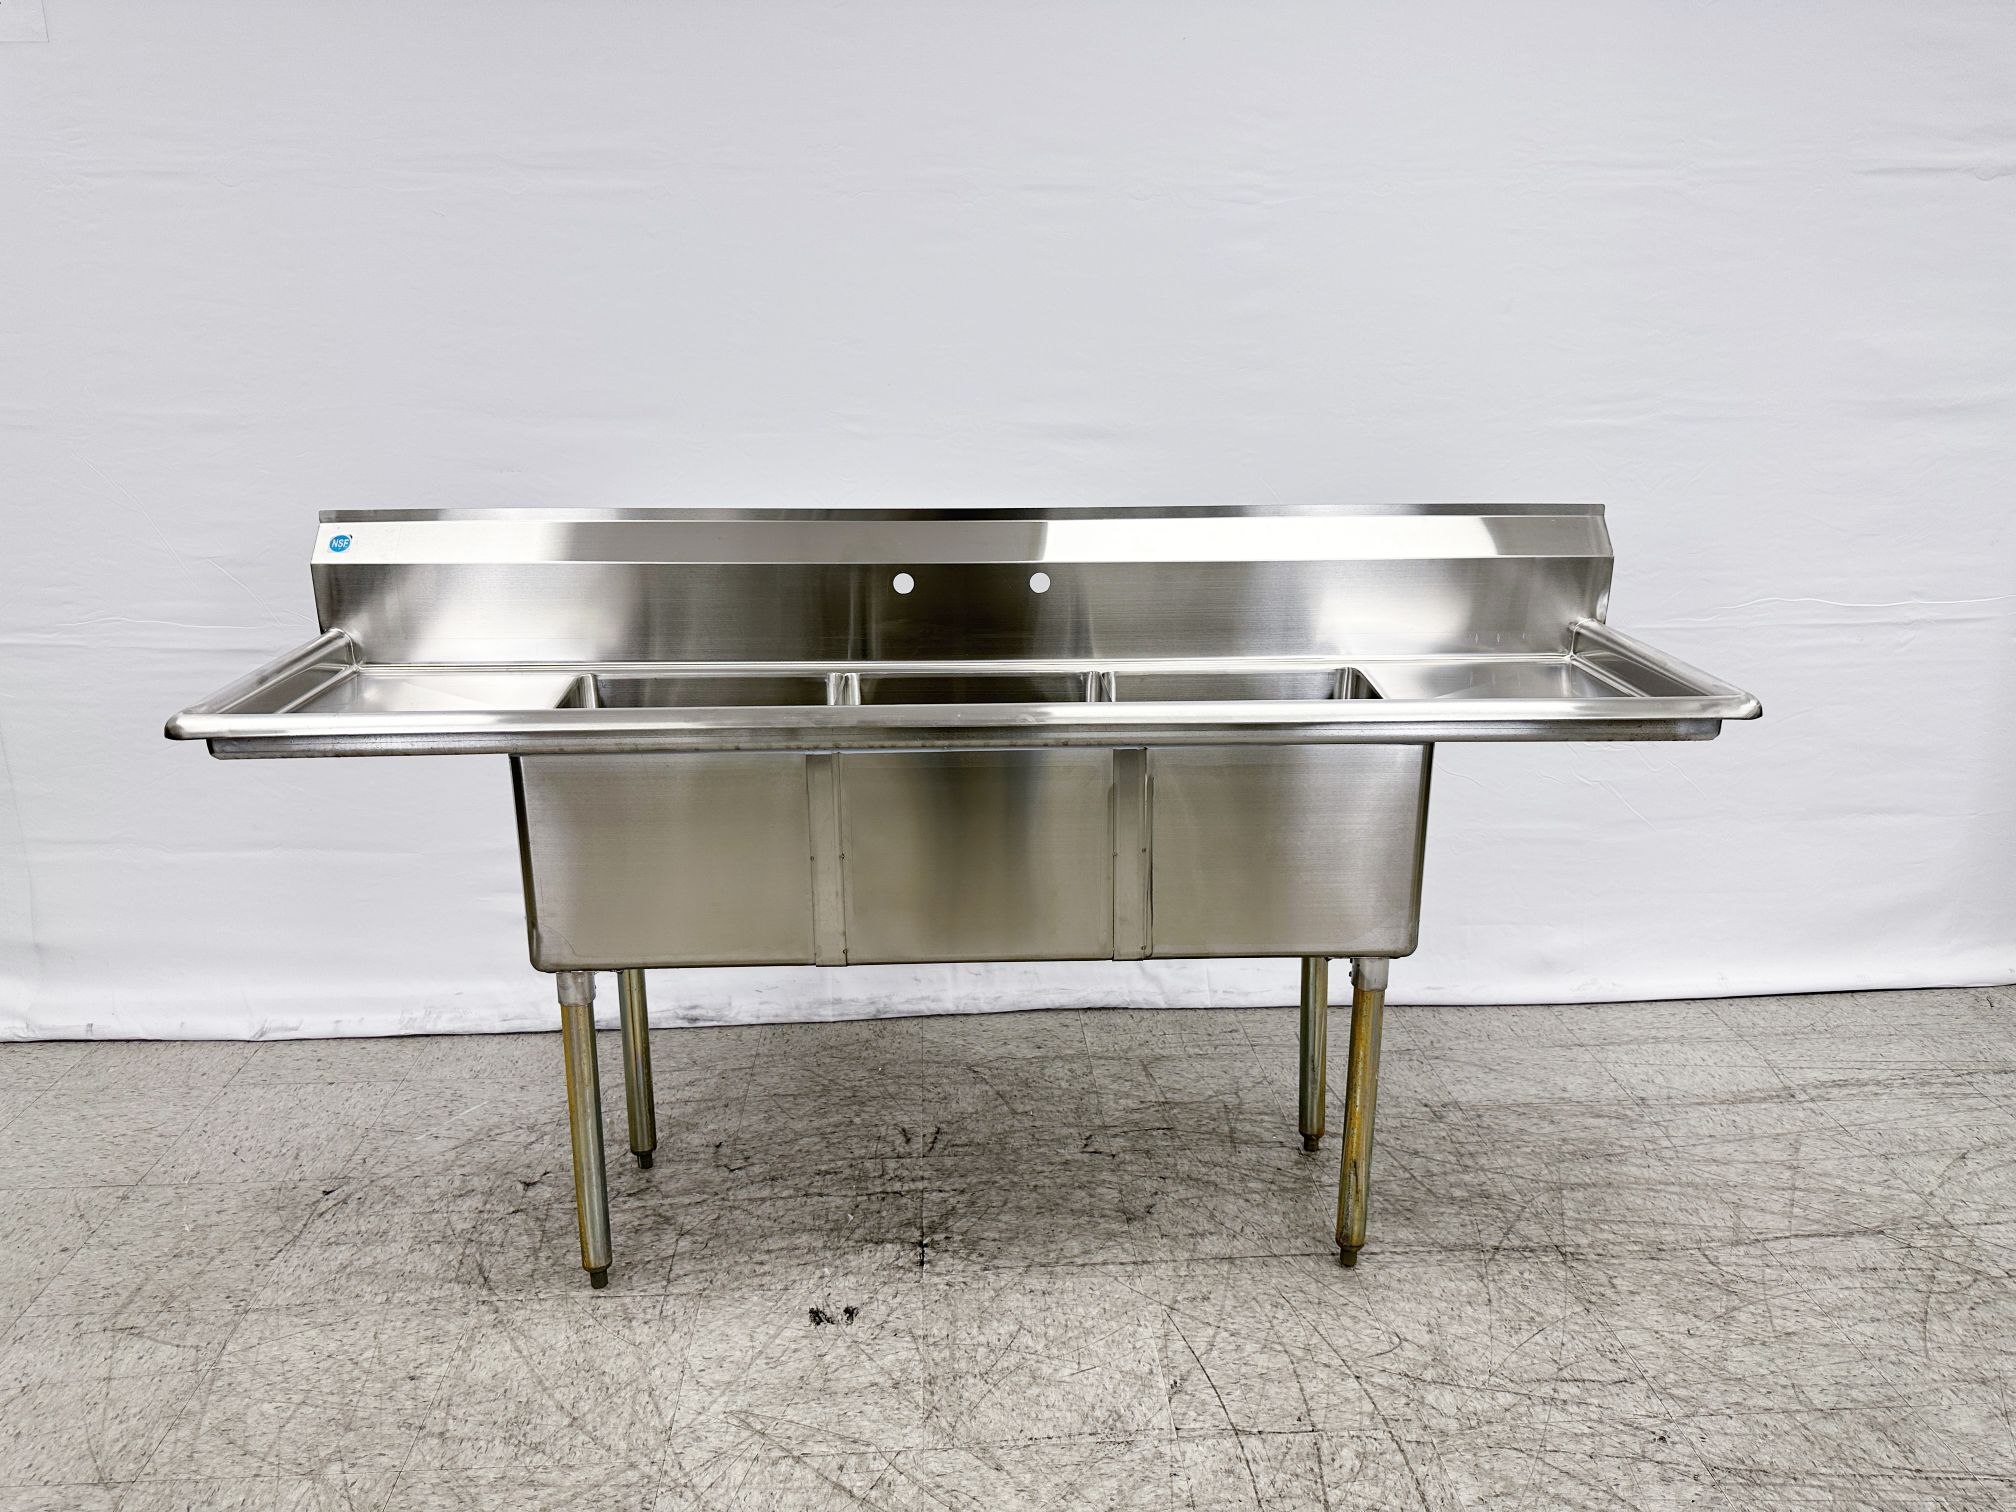 75 ins Stainless Steel Three Compartment Sink NSF C3T151512-15LR